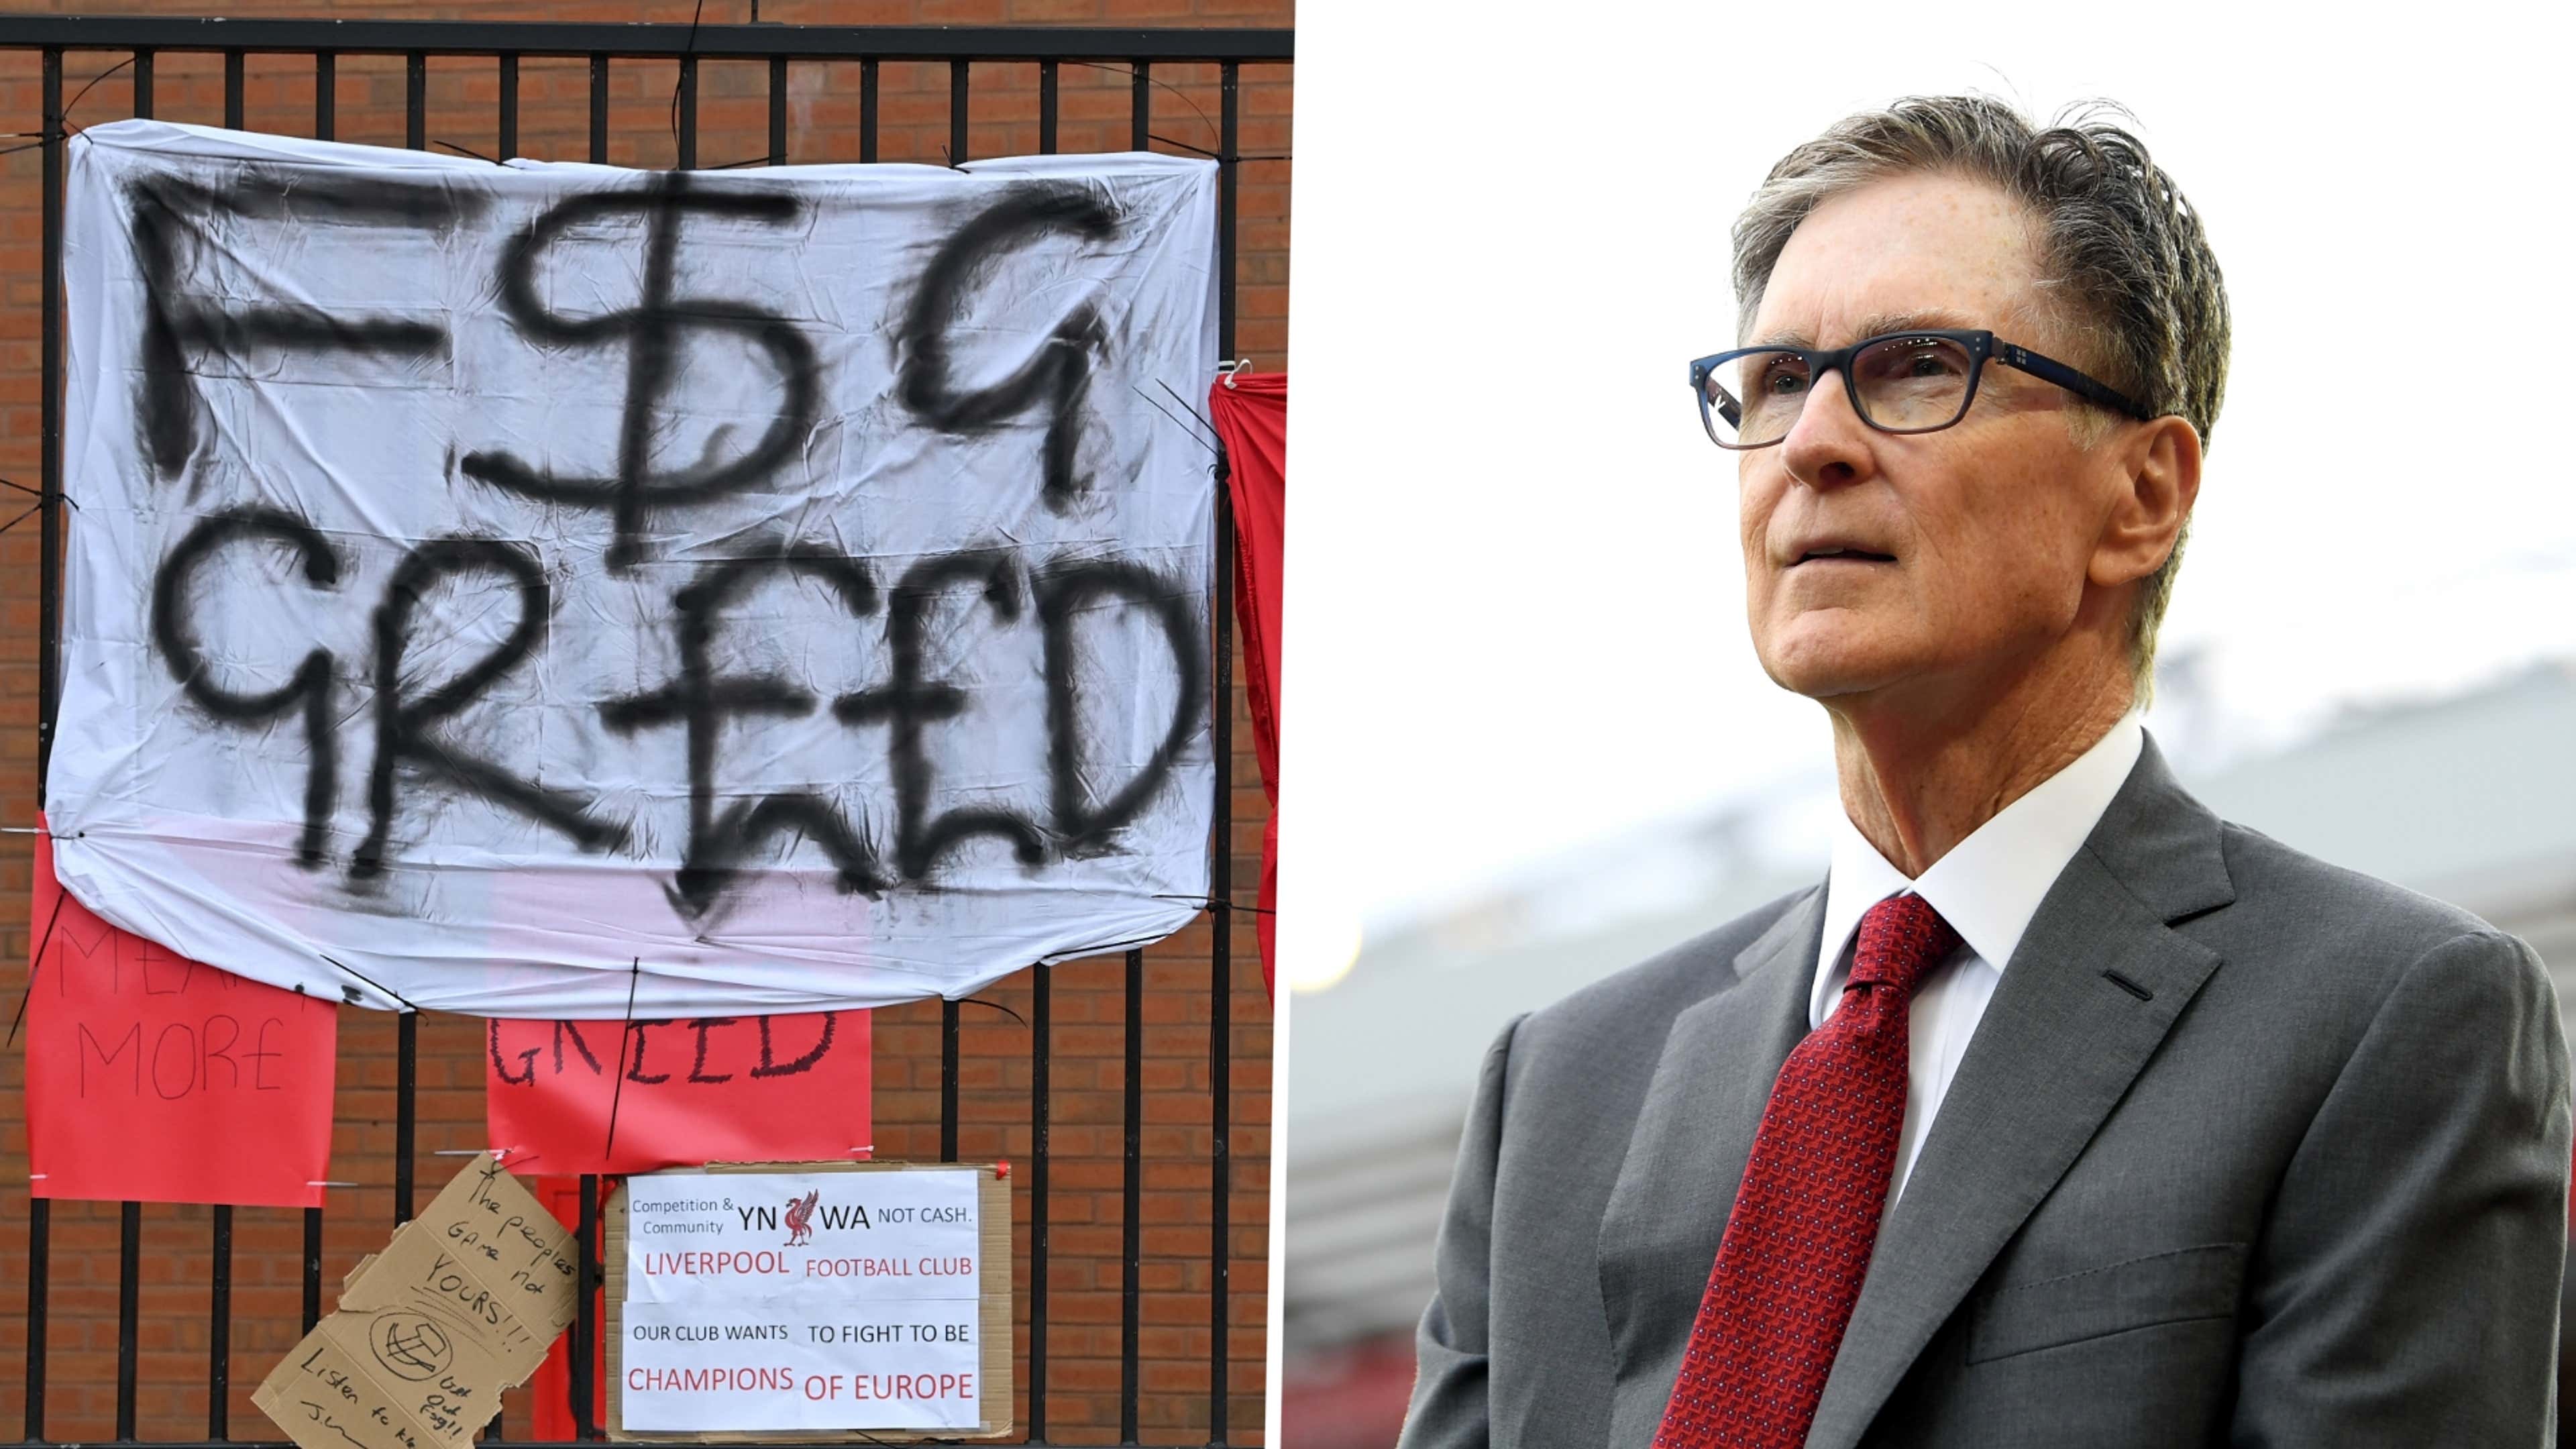 John Henry apologizes to Liverpool fans and employees for involvement in  failed Super League - The Boston Globe